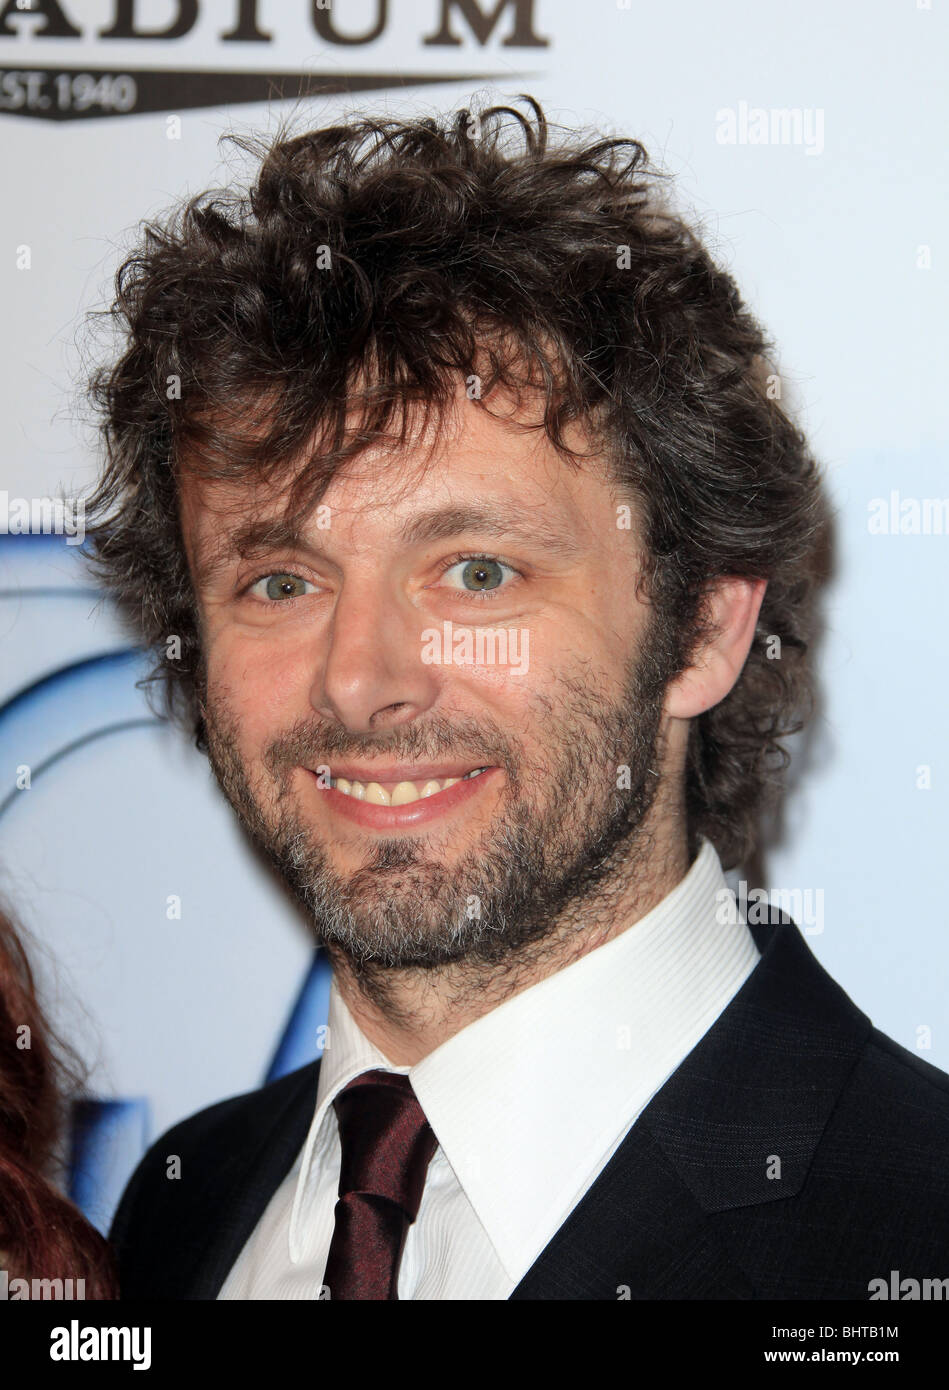 MICHAEL SHEEN 20TH ANNUAL PRODUCERS GUILD AWARDS HOLLYWOOD LOS ANGELES CA USA 24 January 2009 Stock Photo